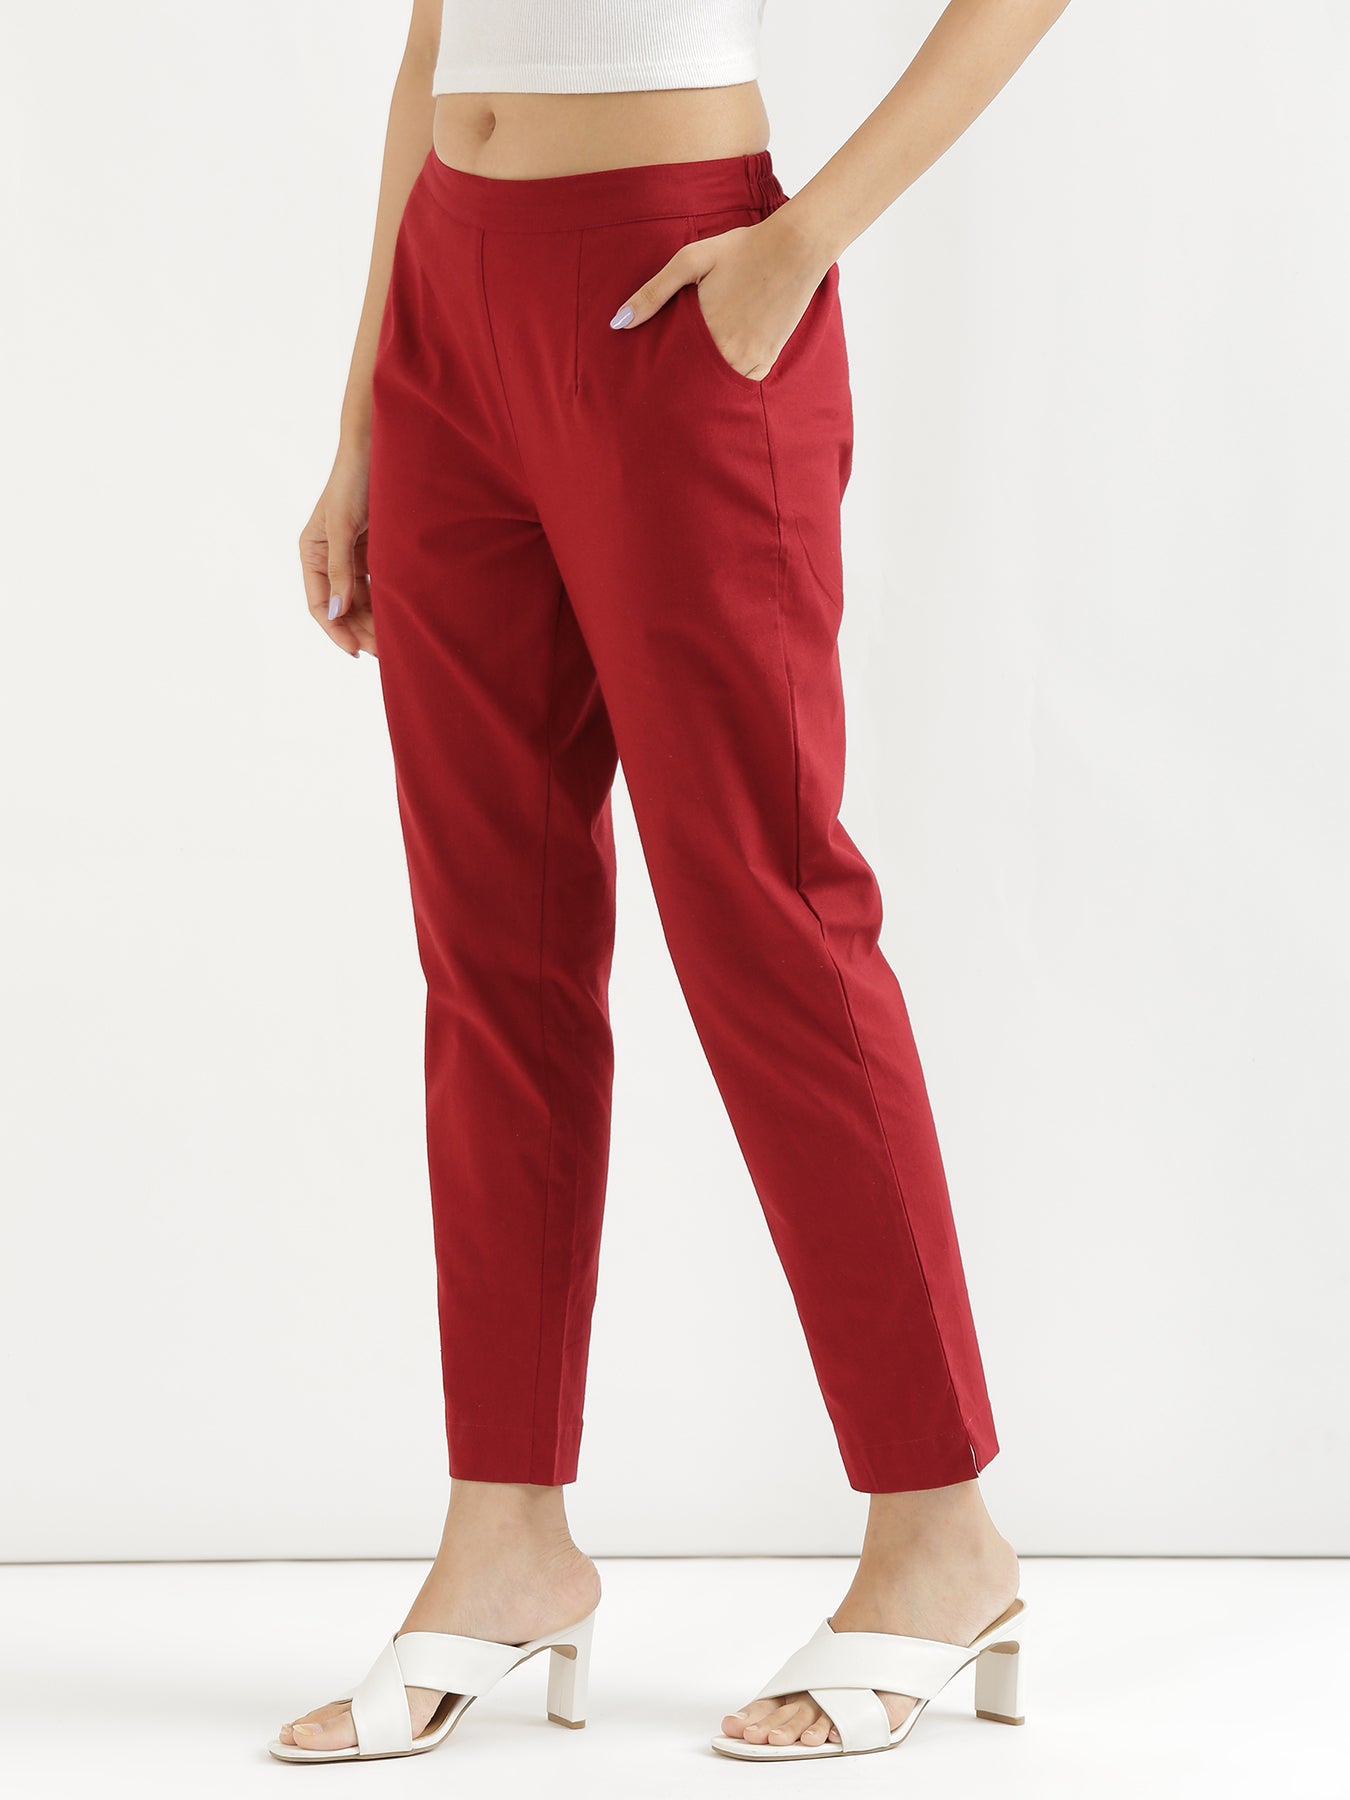 Burgundy cigarette pants with very chic pleats with luxury belt